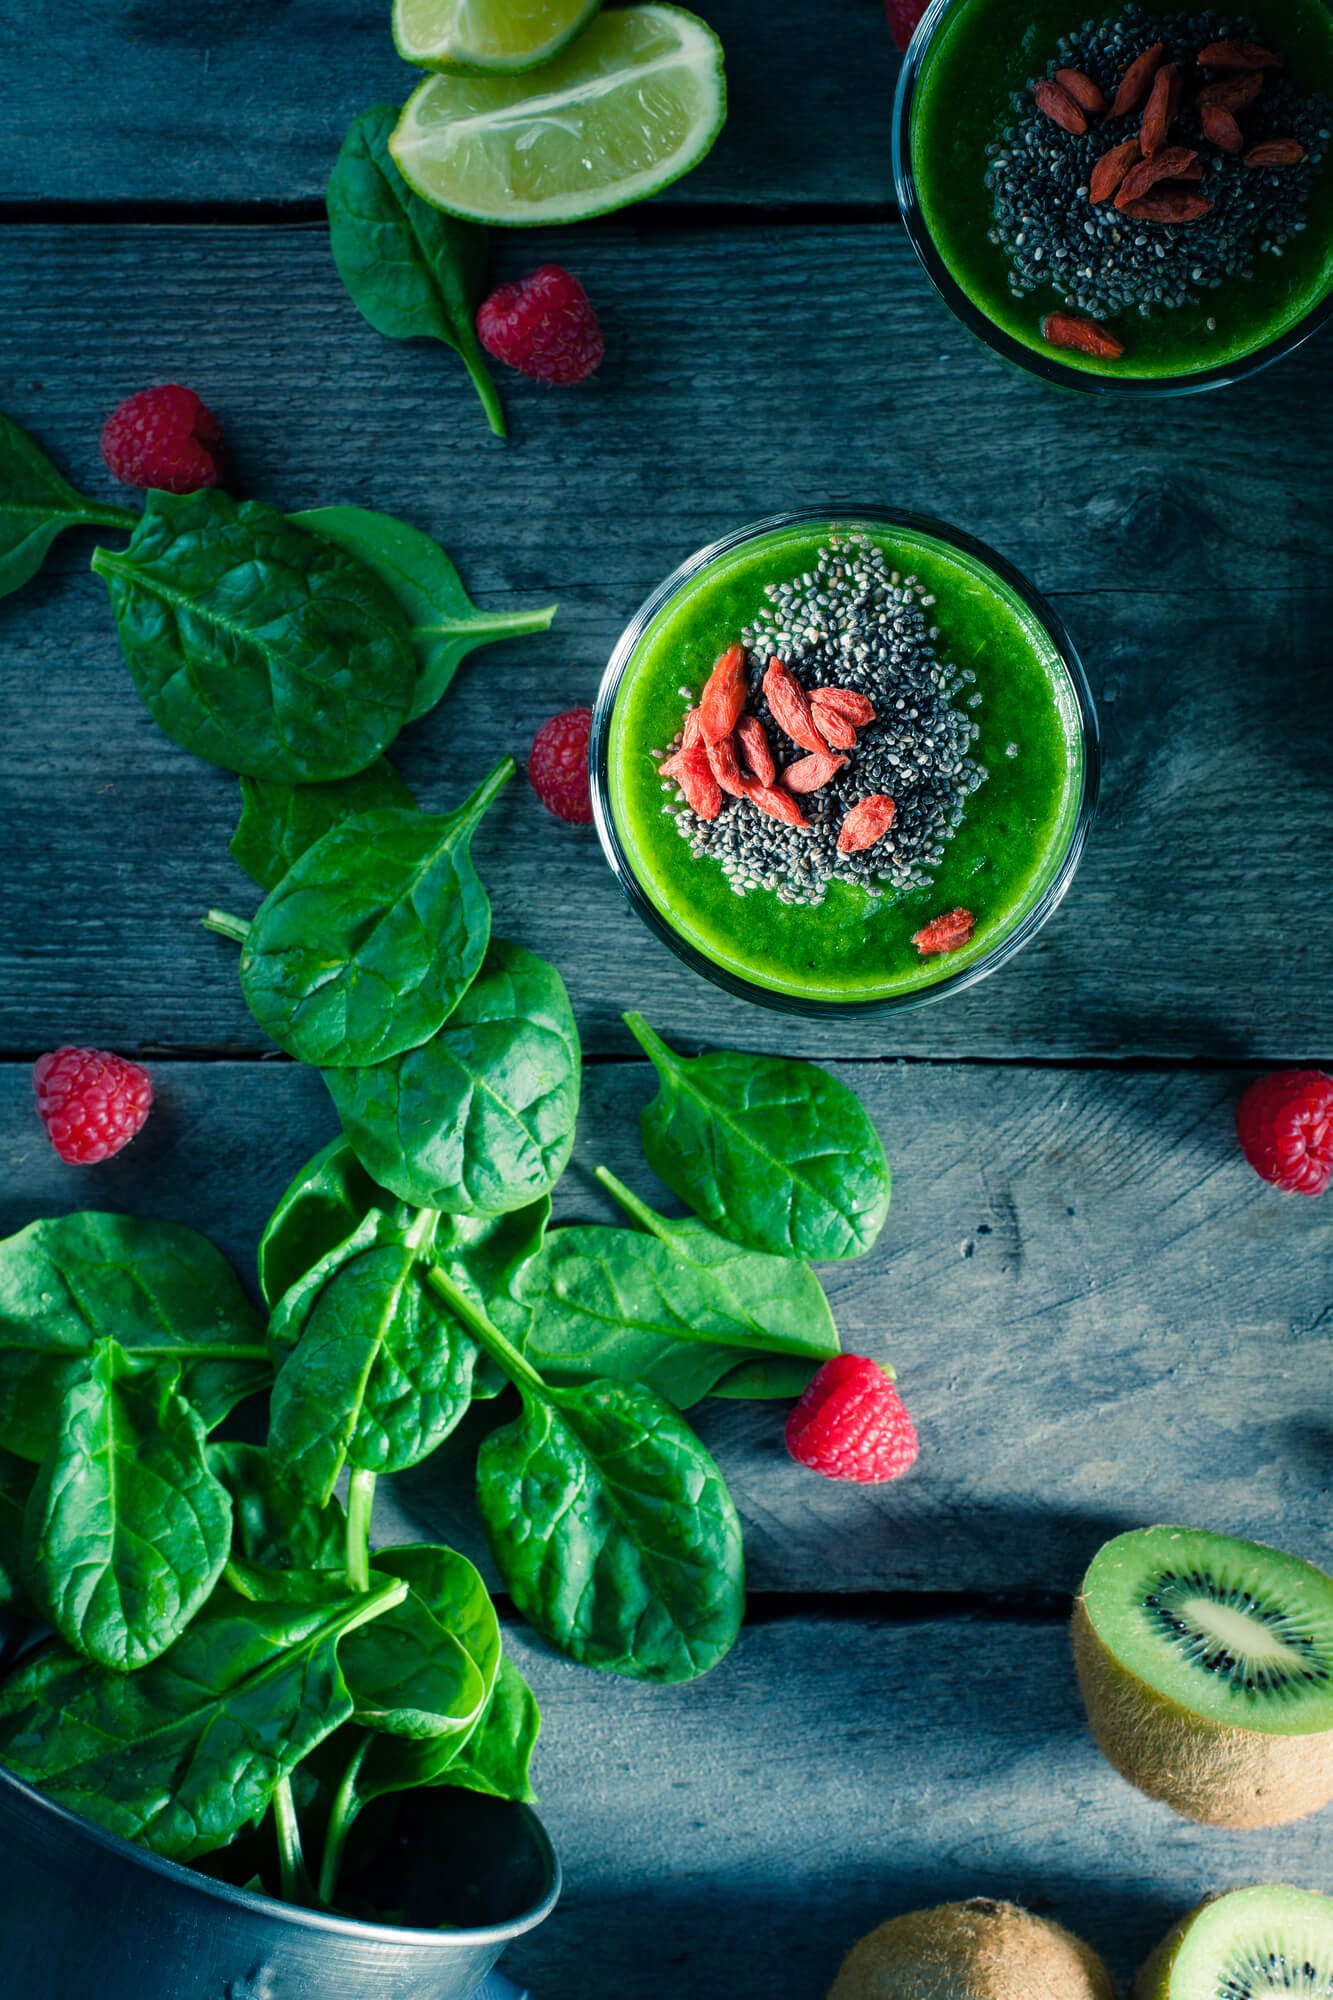 12 Mind-Blowing Health Benefits Of Green Smoothies That Will Change Your Life